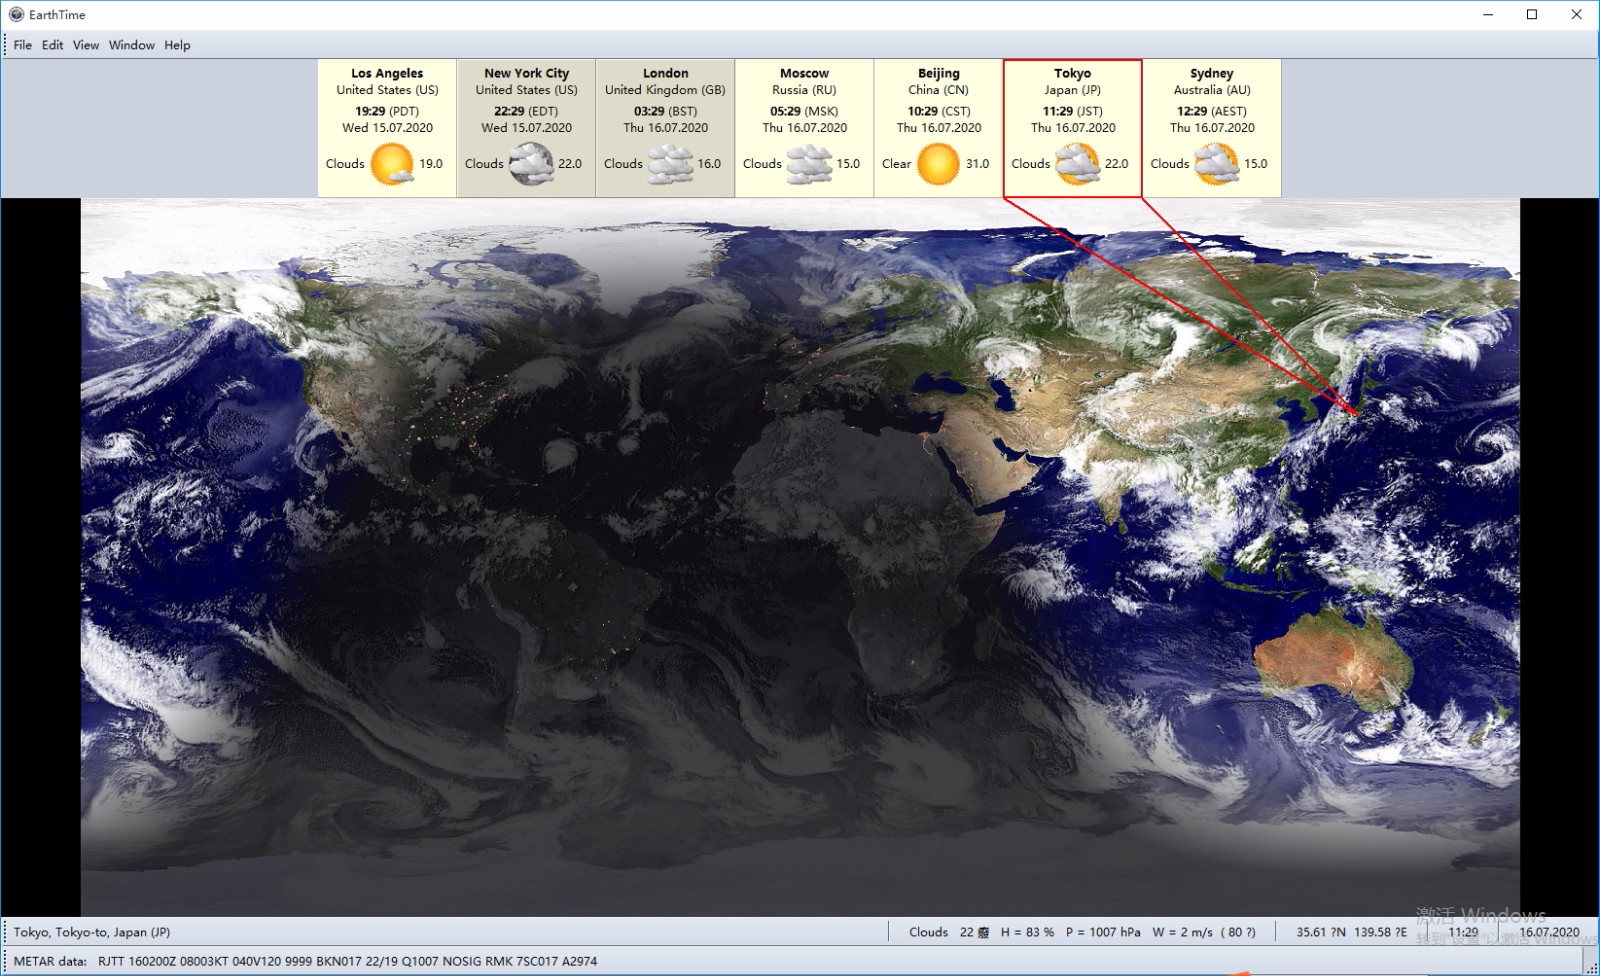 download the last version for android EarthTime 6.24.8